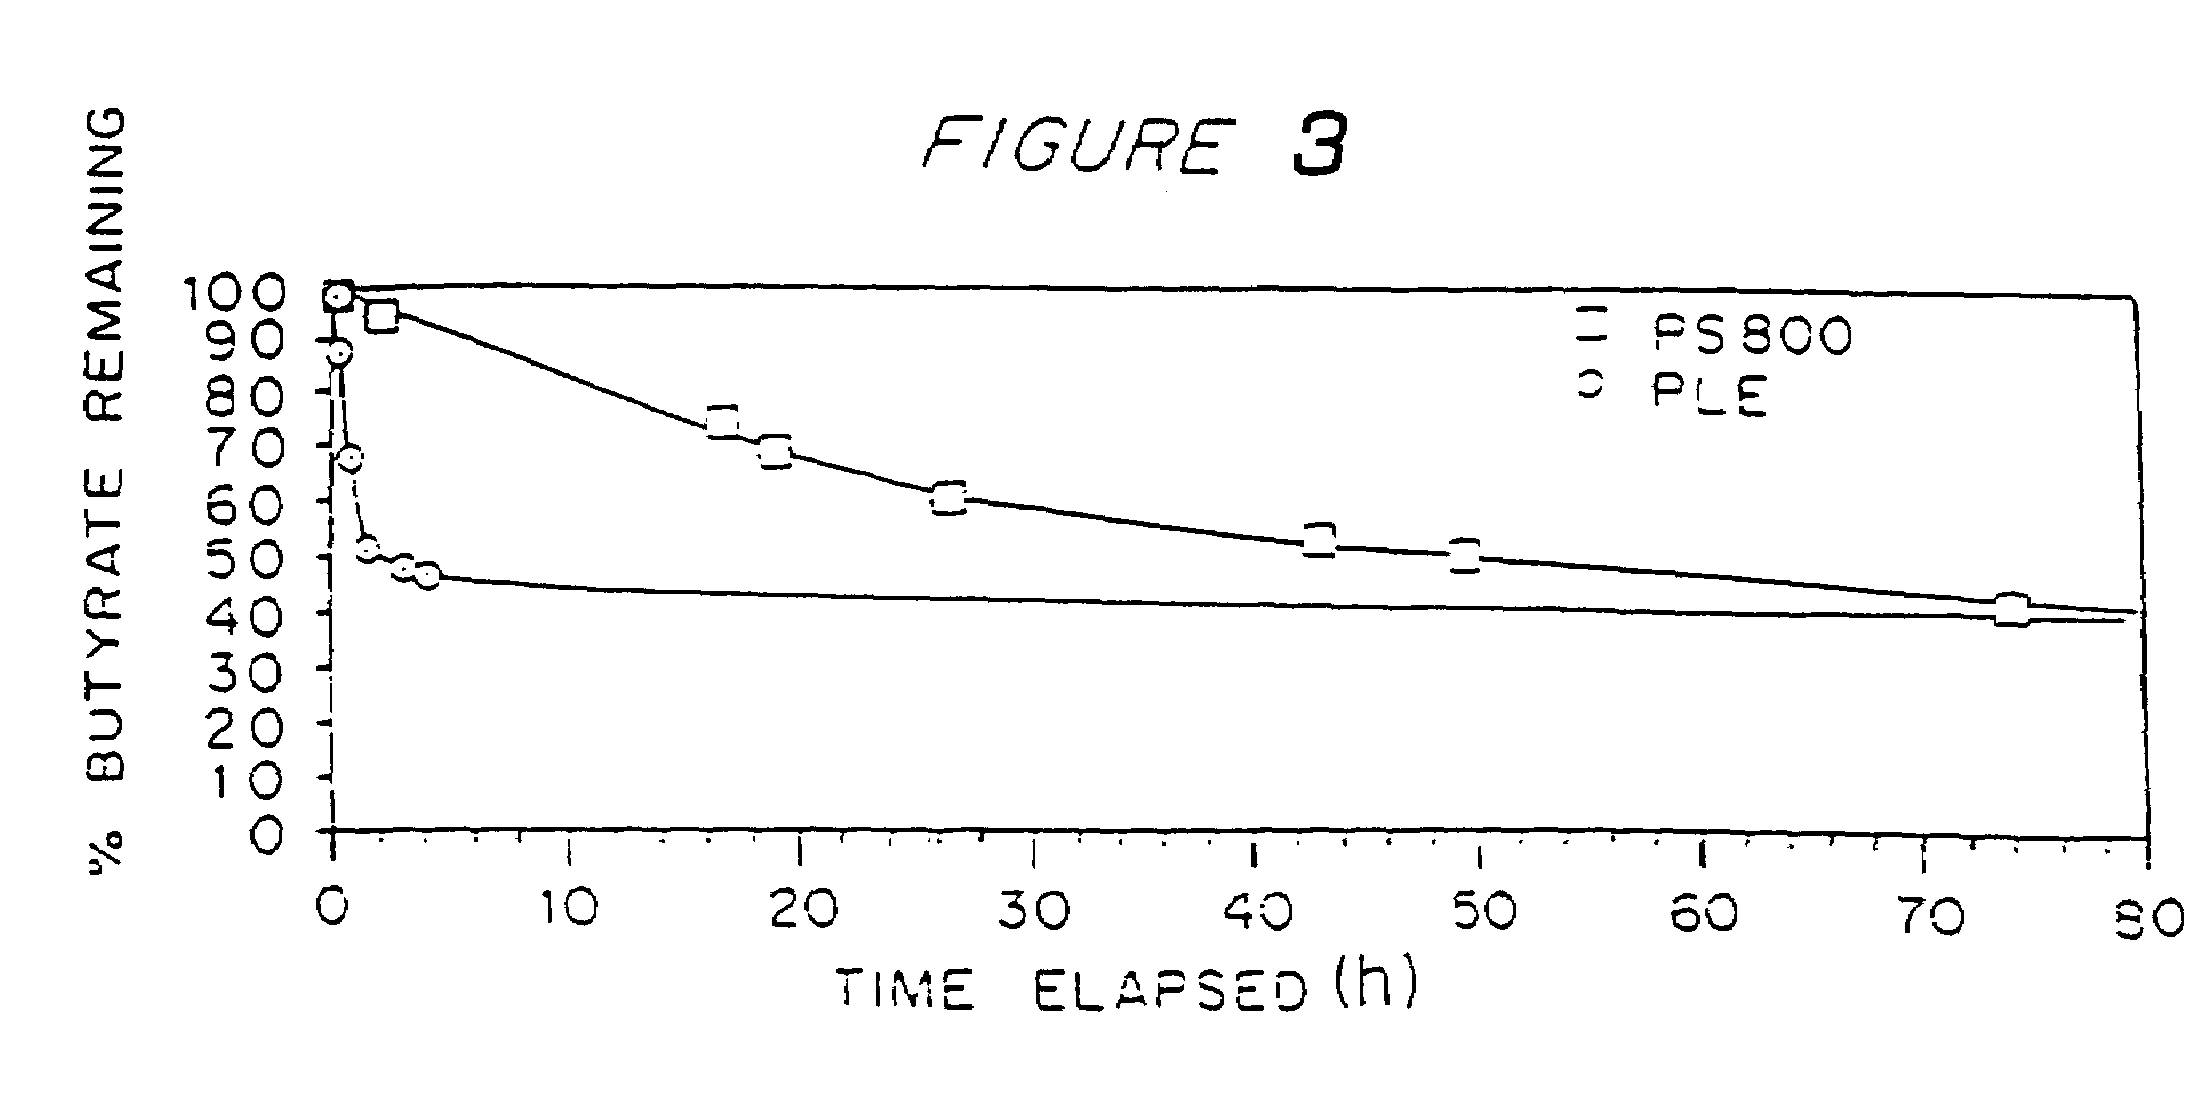 Method of resolution and antiviral activity of 1,3-oxathiolane nucleoside enantiomers